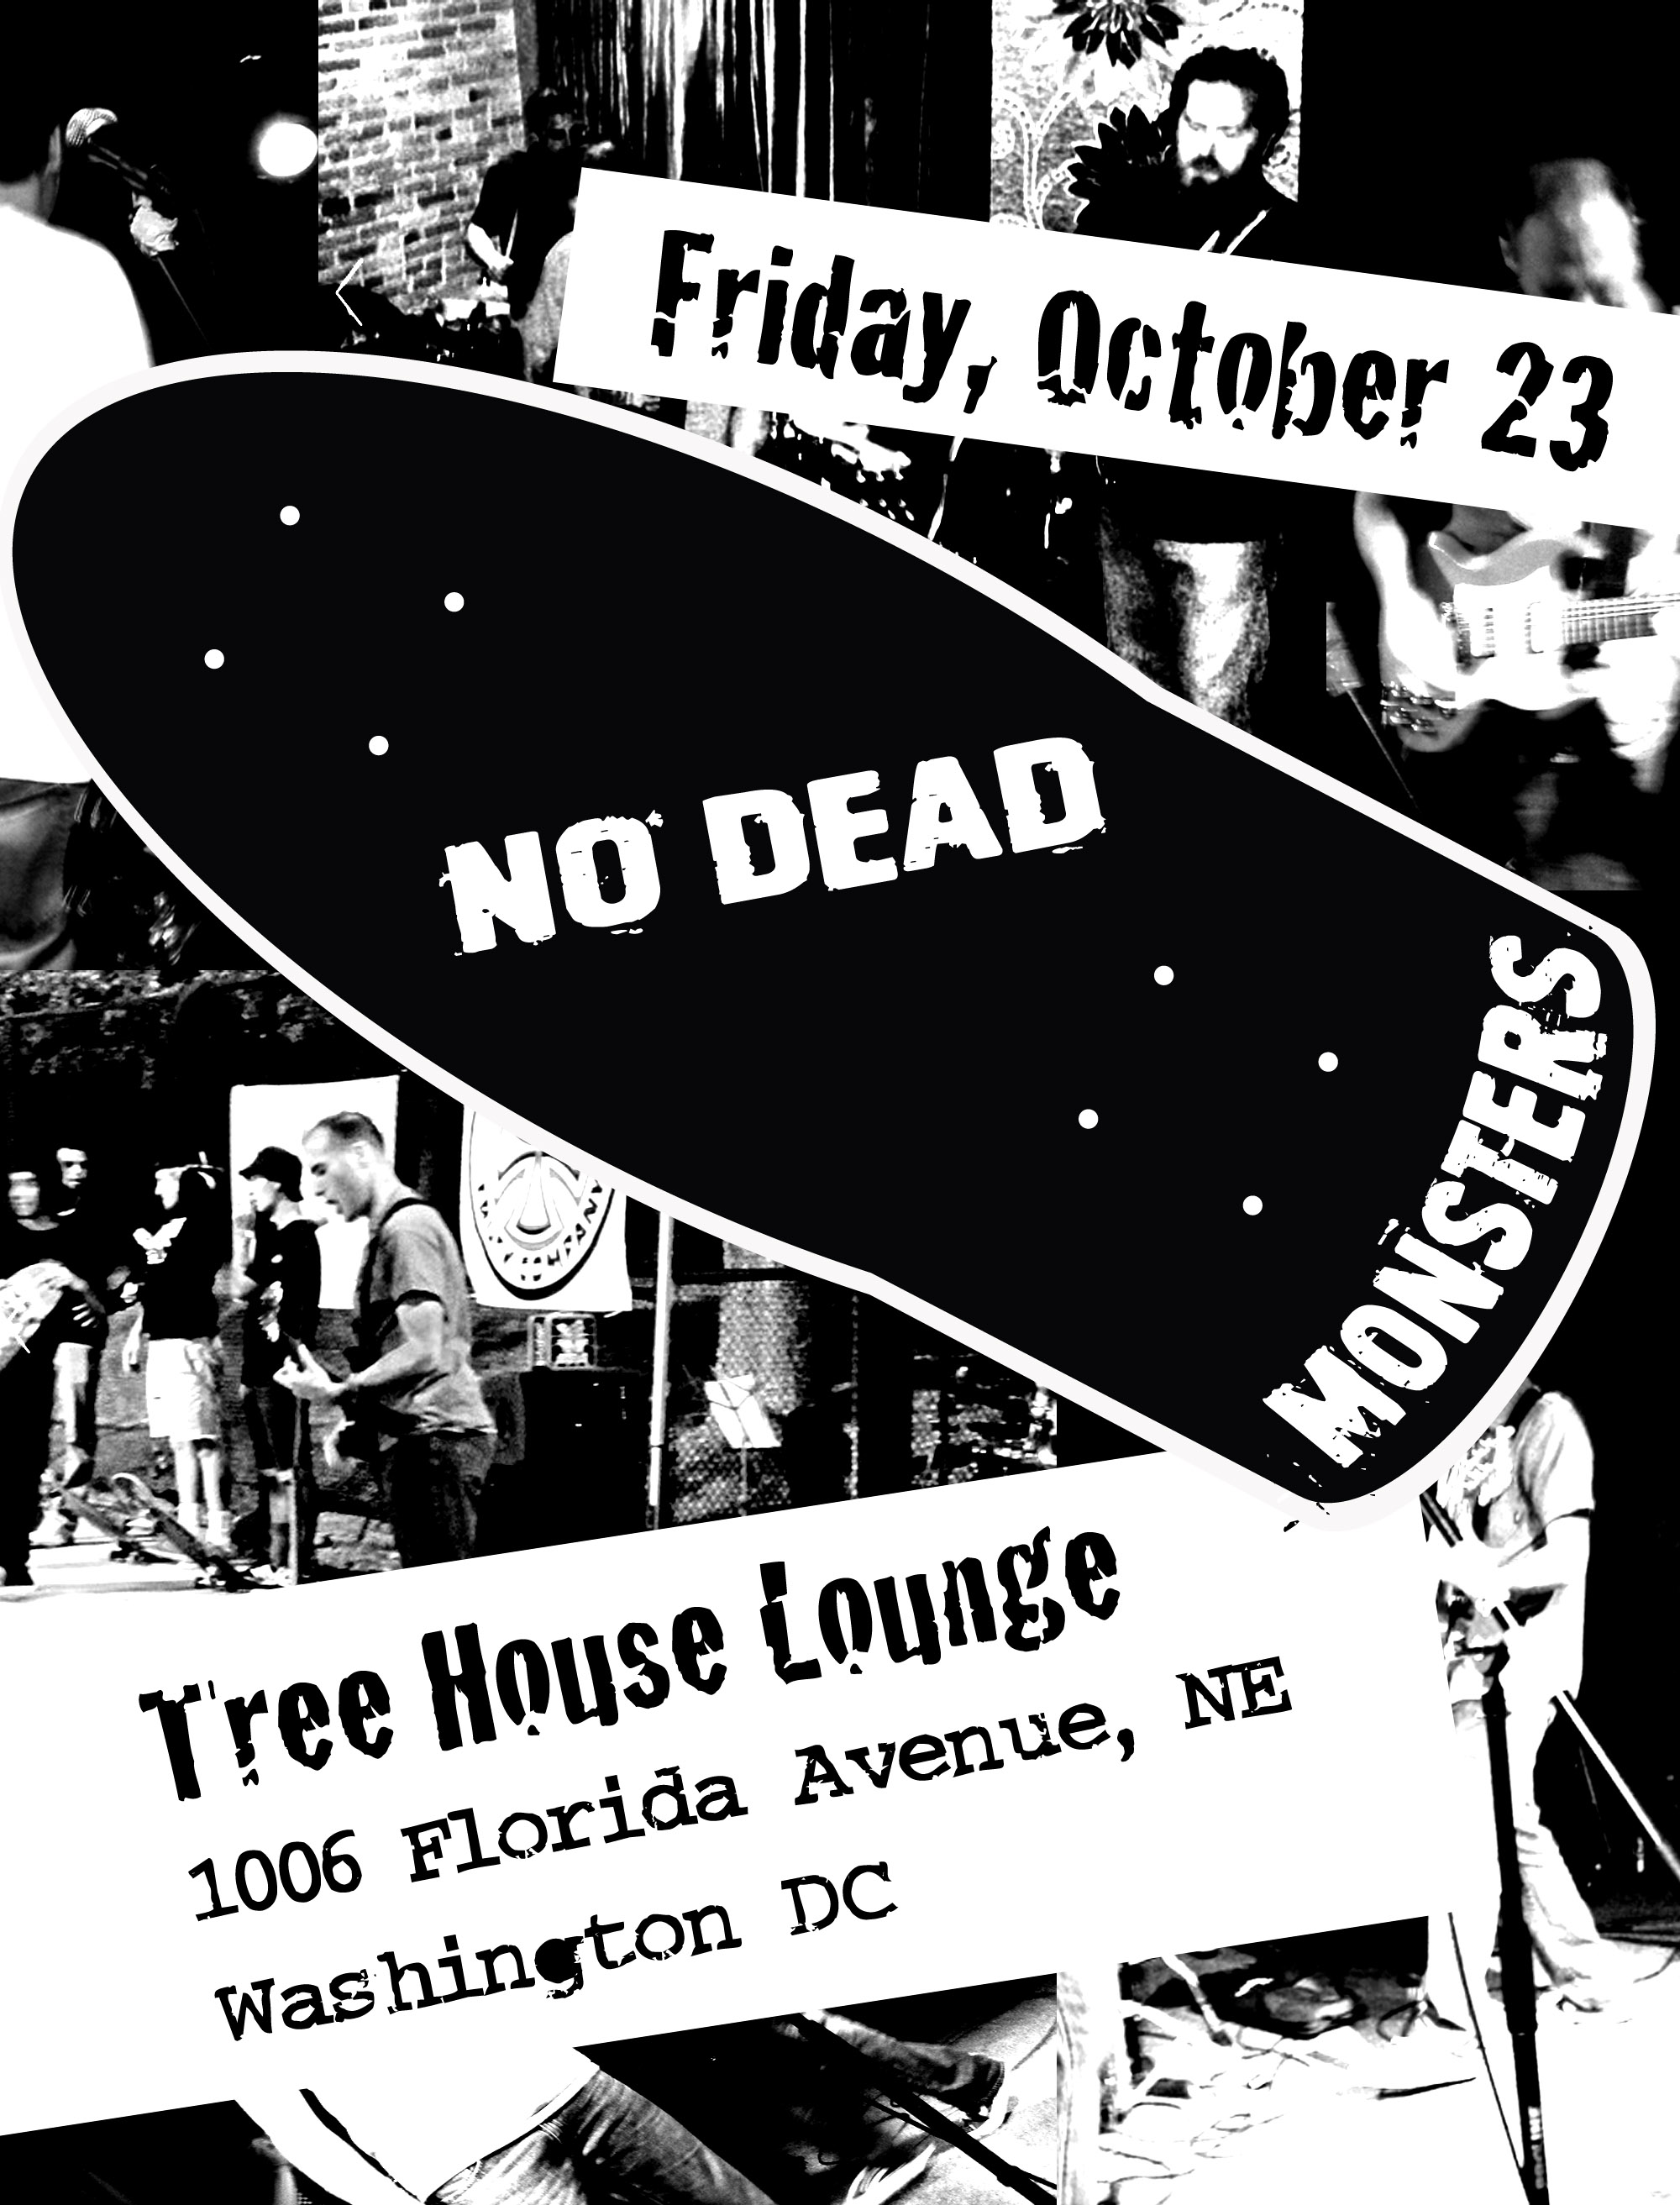 No Dead Monsters Treehouse Lounge show flyer